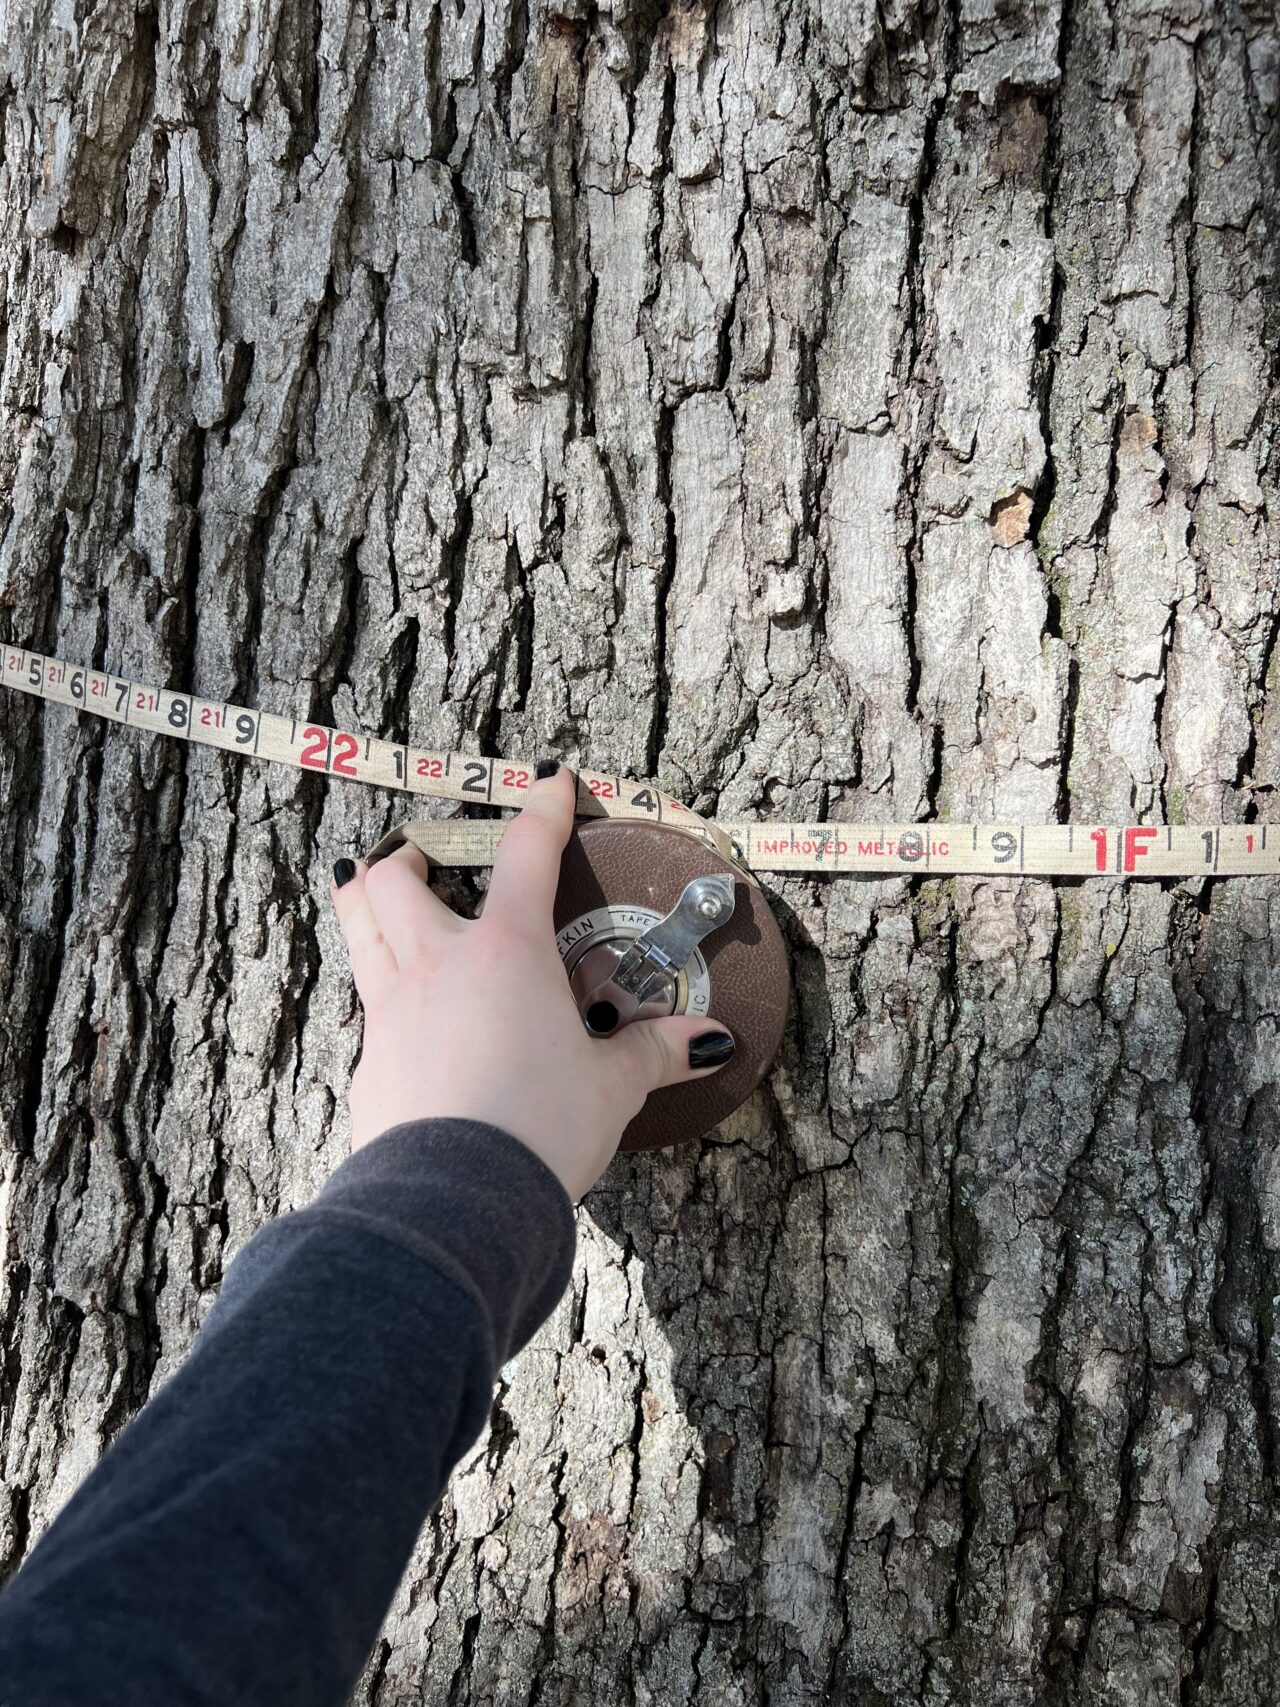 The trunk circumference of Davidson County, Tenn.’s largest white oak measures 22 feet. The tree sits outside the Nashville home of a country music star. Photo courtesy of Erin Victorson